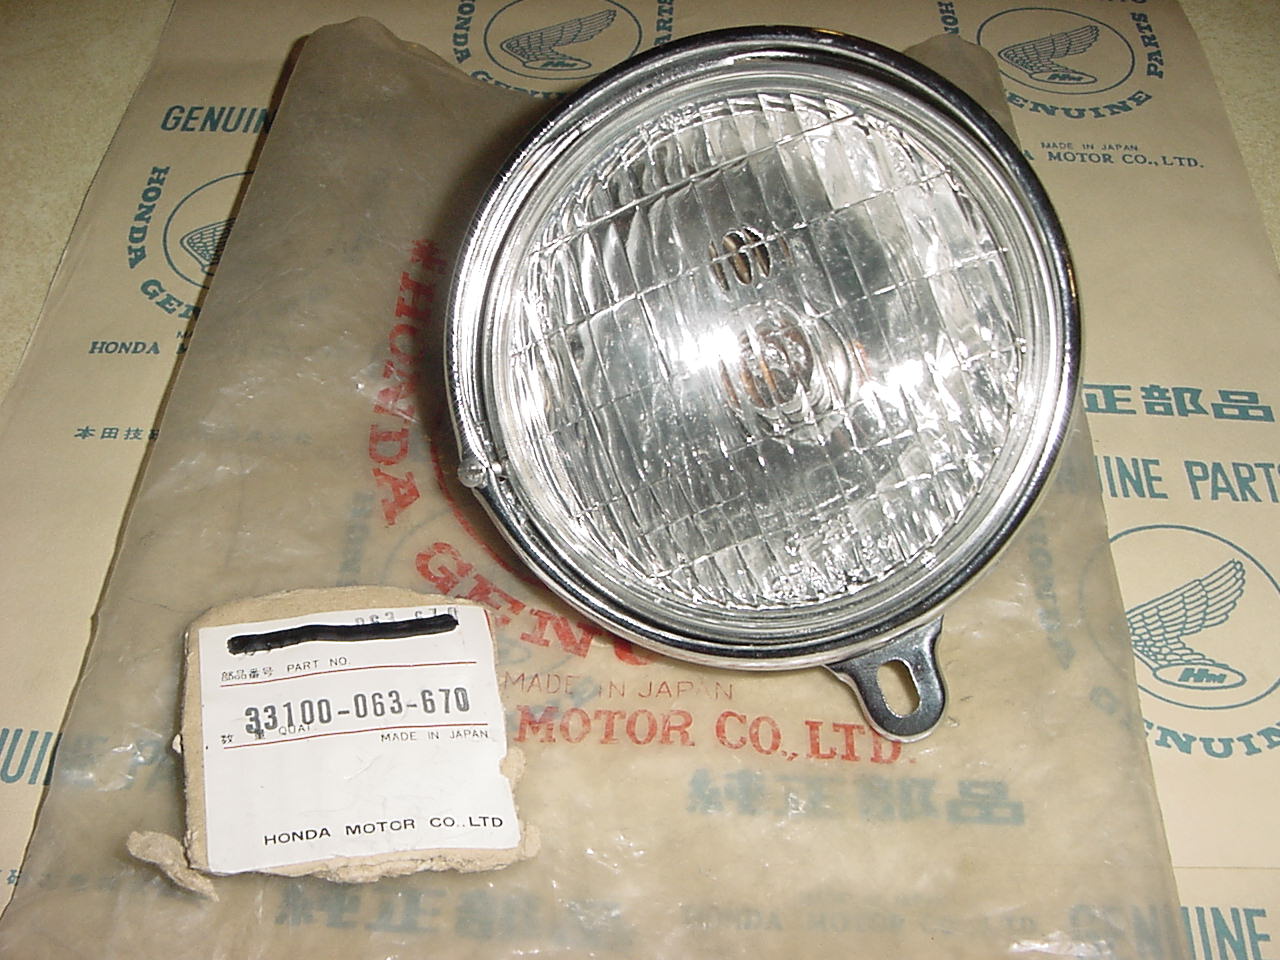 33100-063-670 | HEADLIGHT ASSEMBLY. HONDA PART NUMBER 33100-063-670. THIS IS FOR HONDA Z50AK1, Z50AK2, PC50.